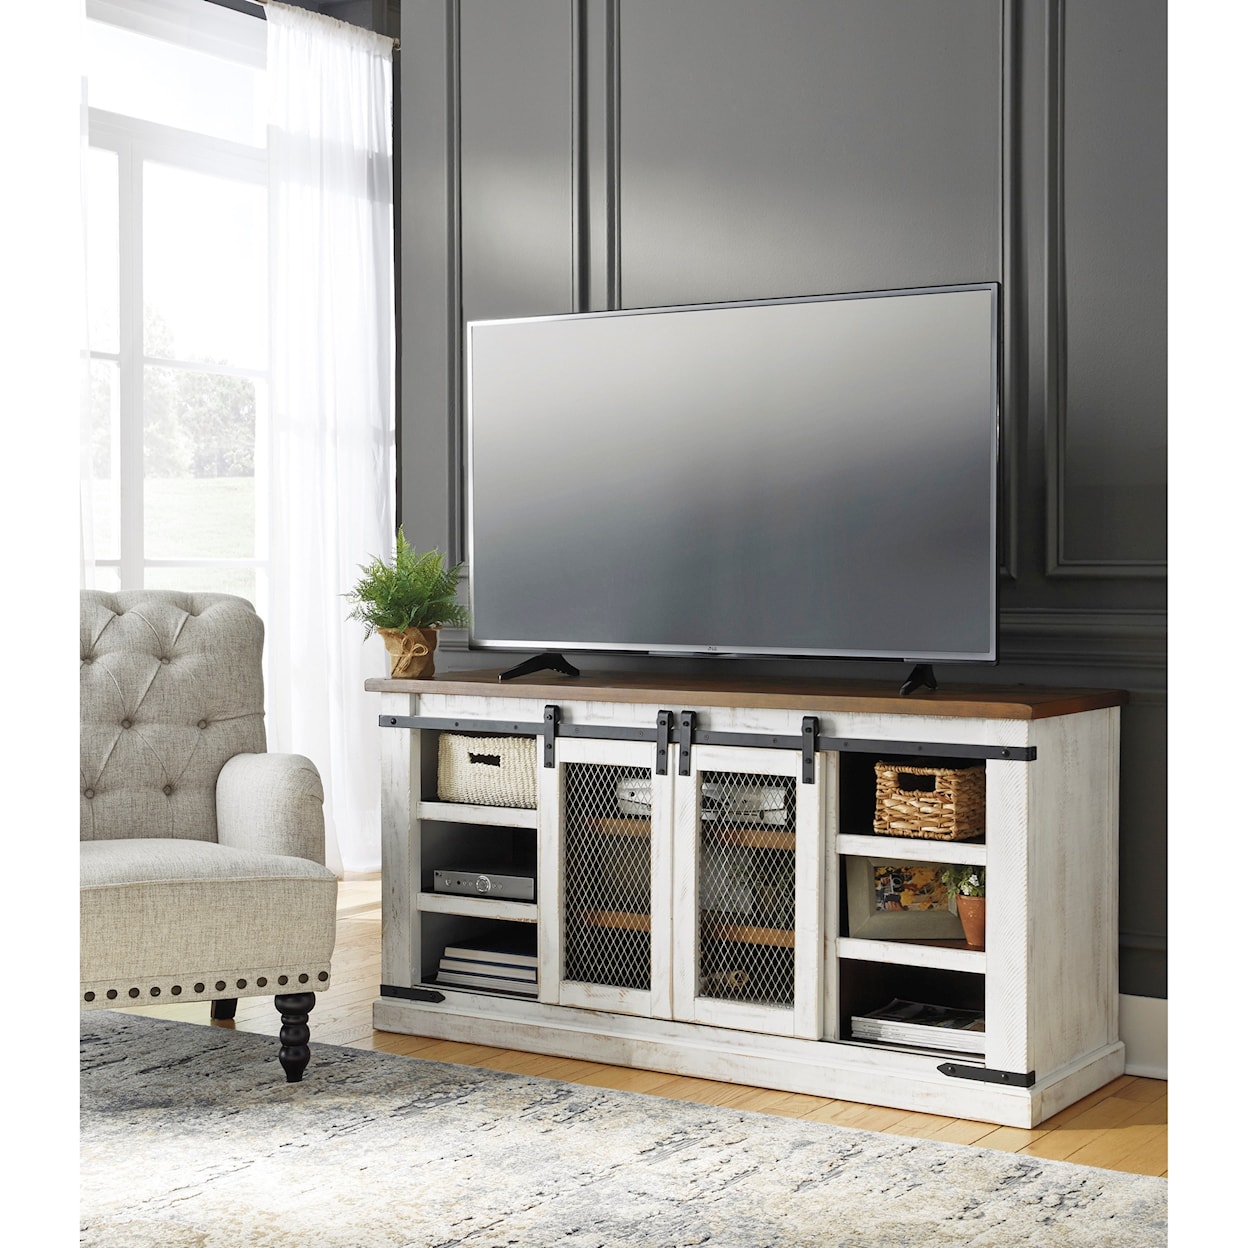 Signature Design by Ashley Danell Ridge Large TV Stand